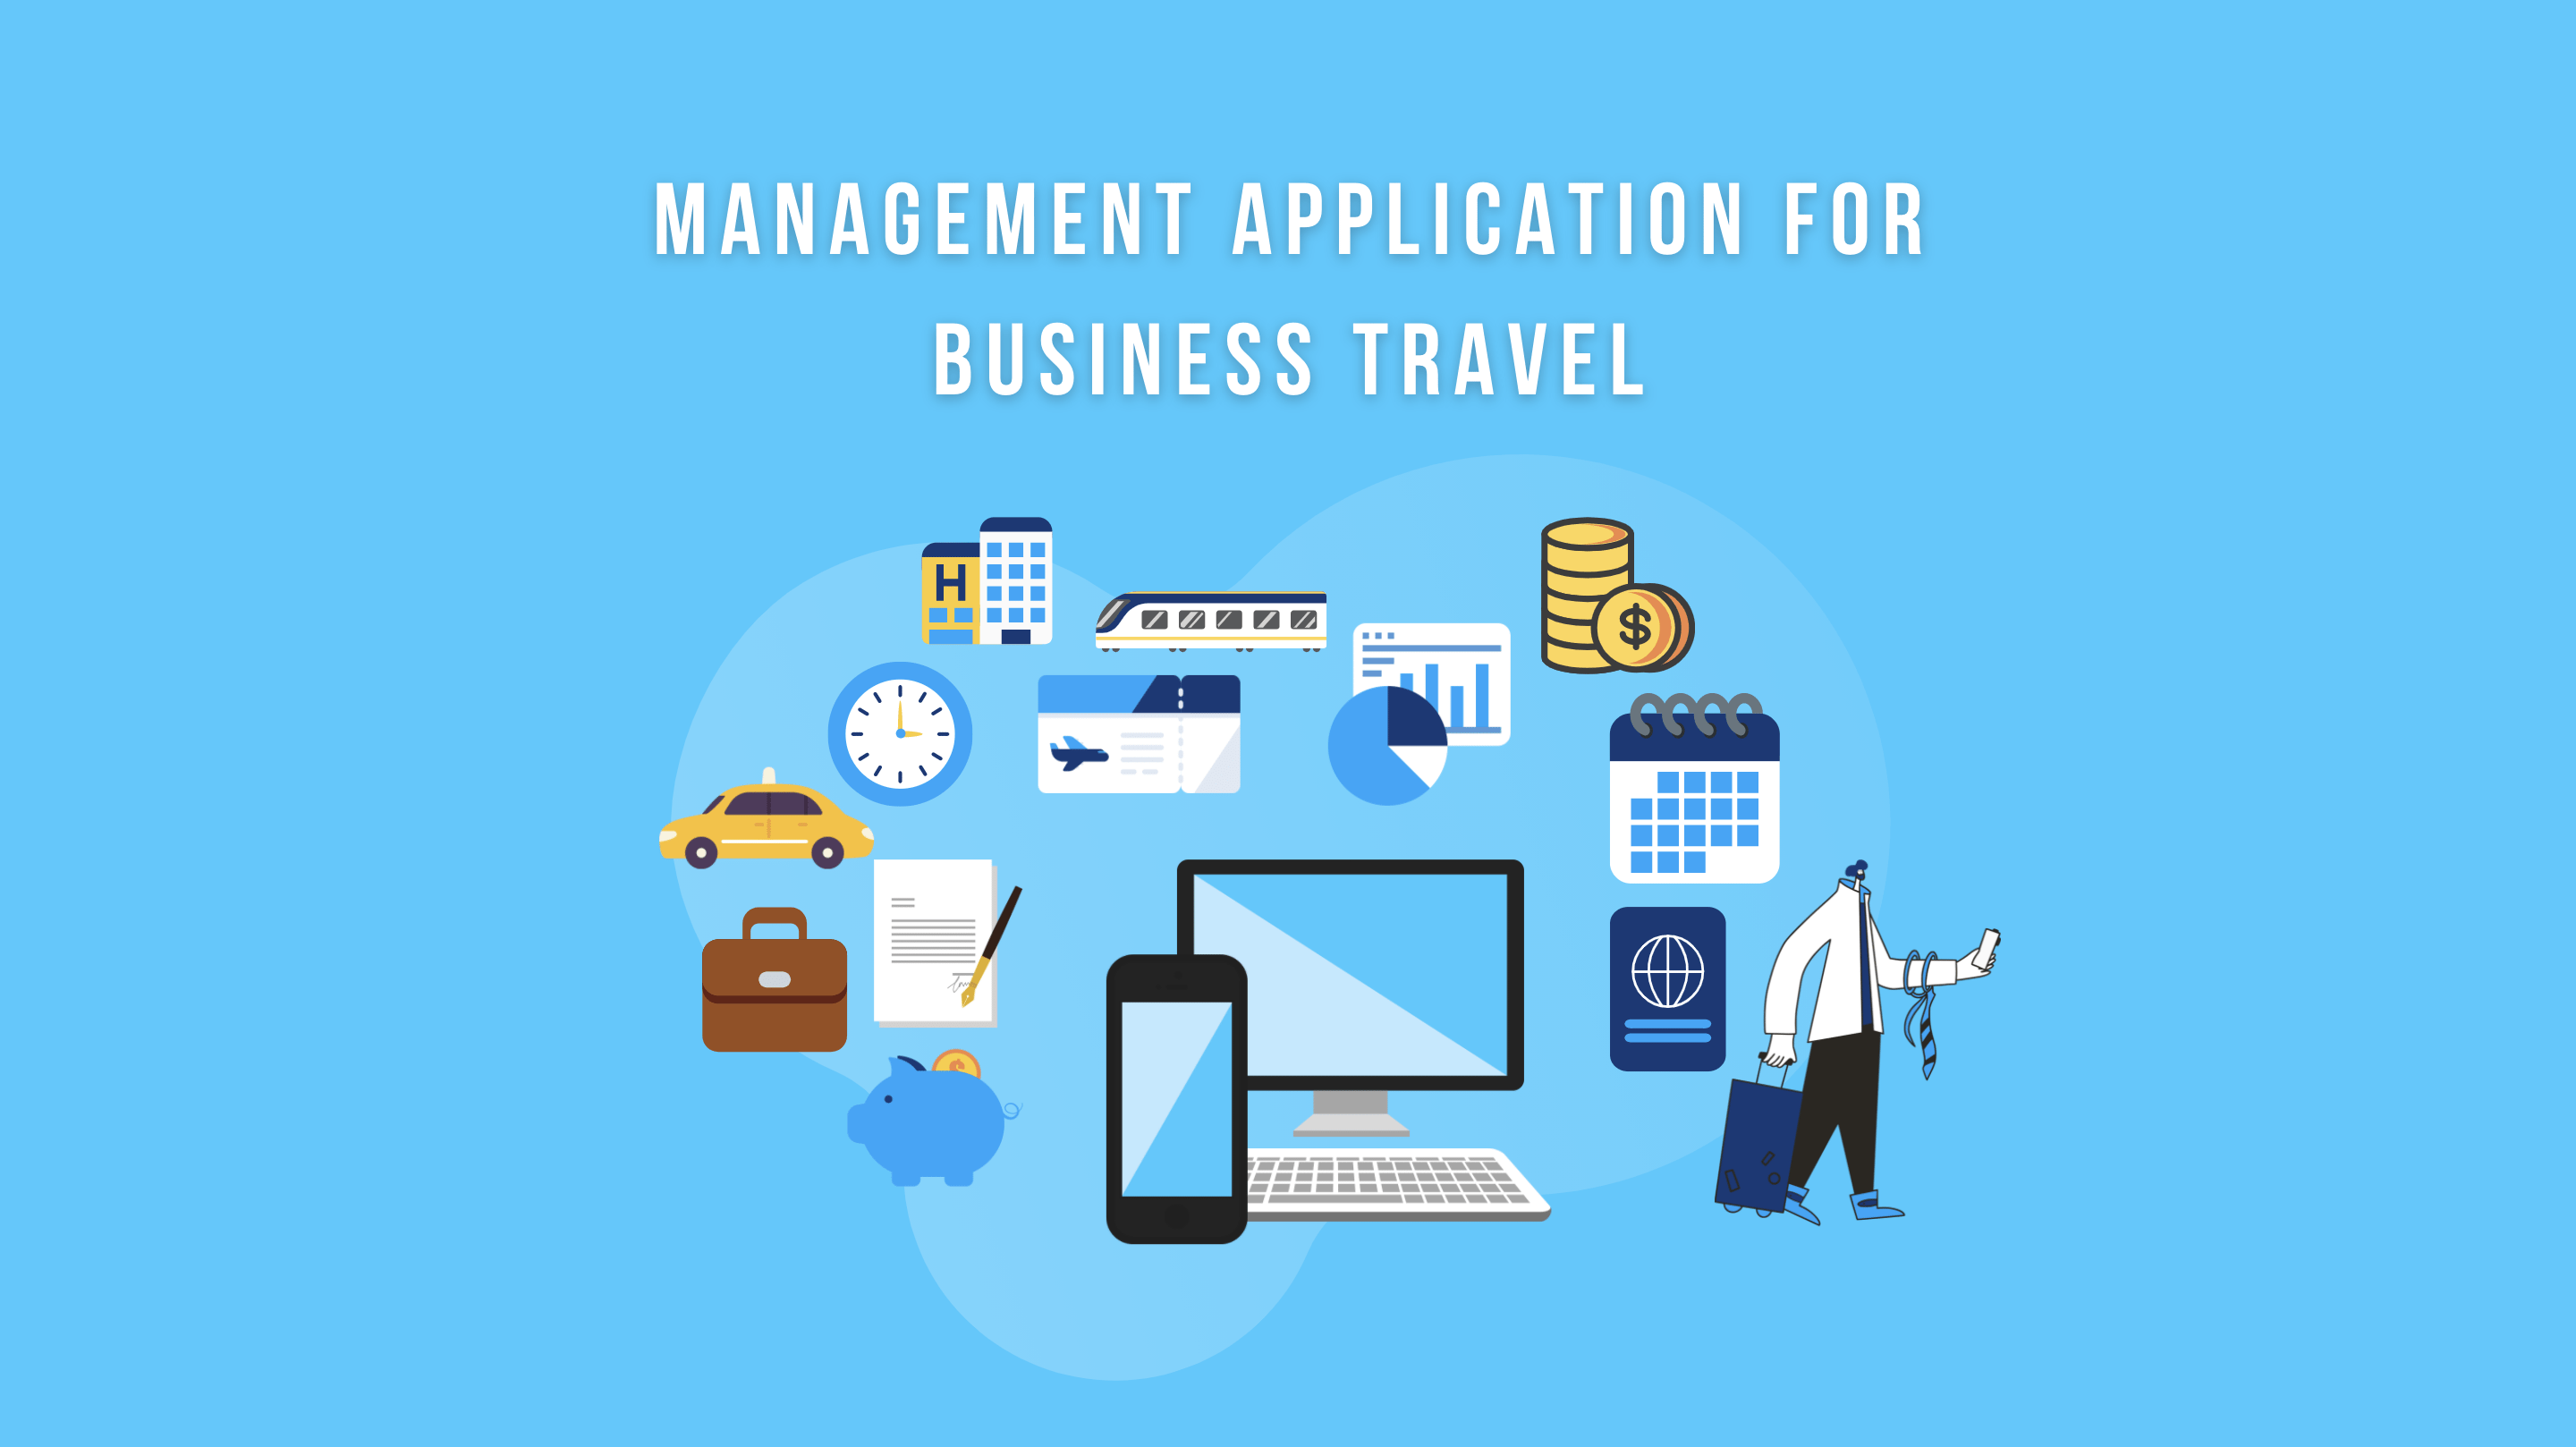 Management application for business travel